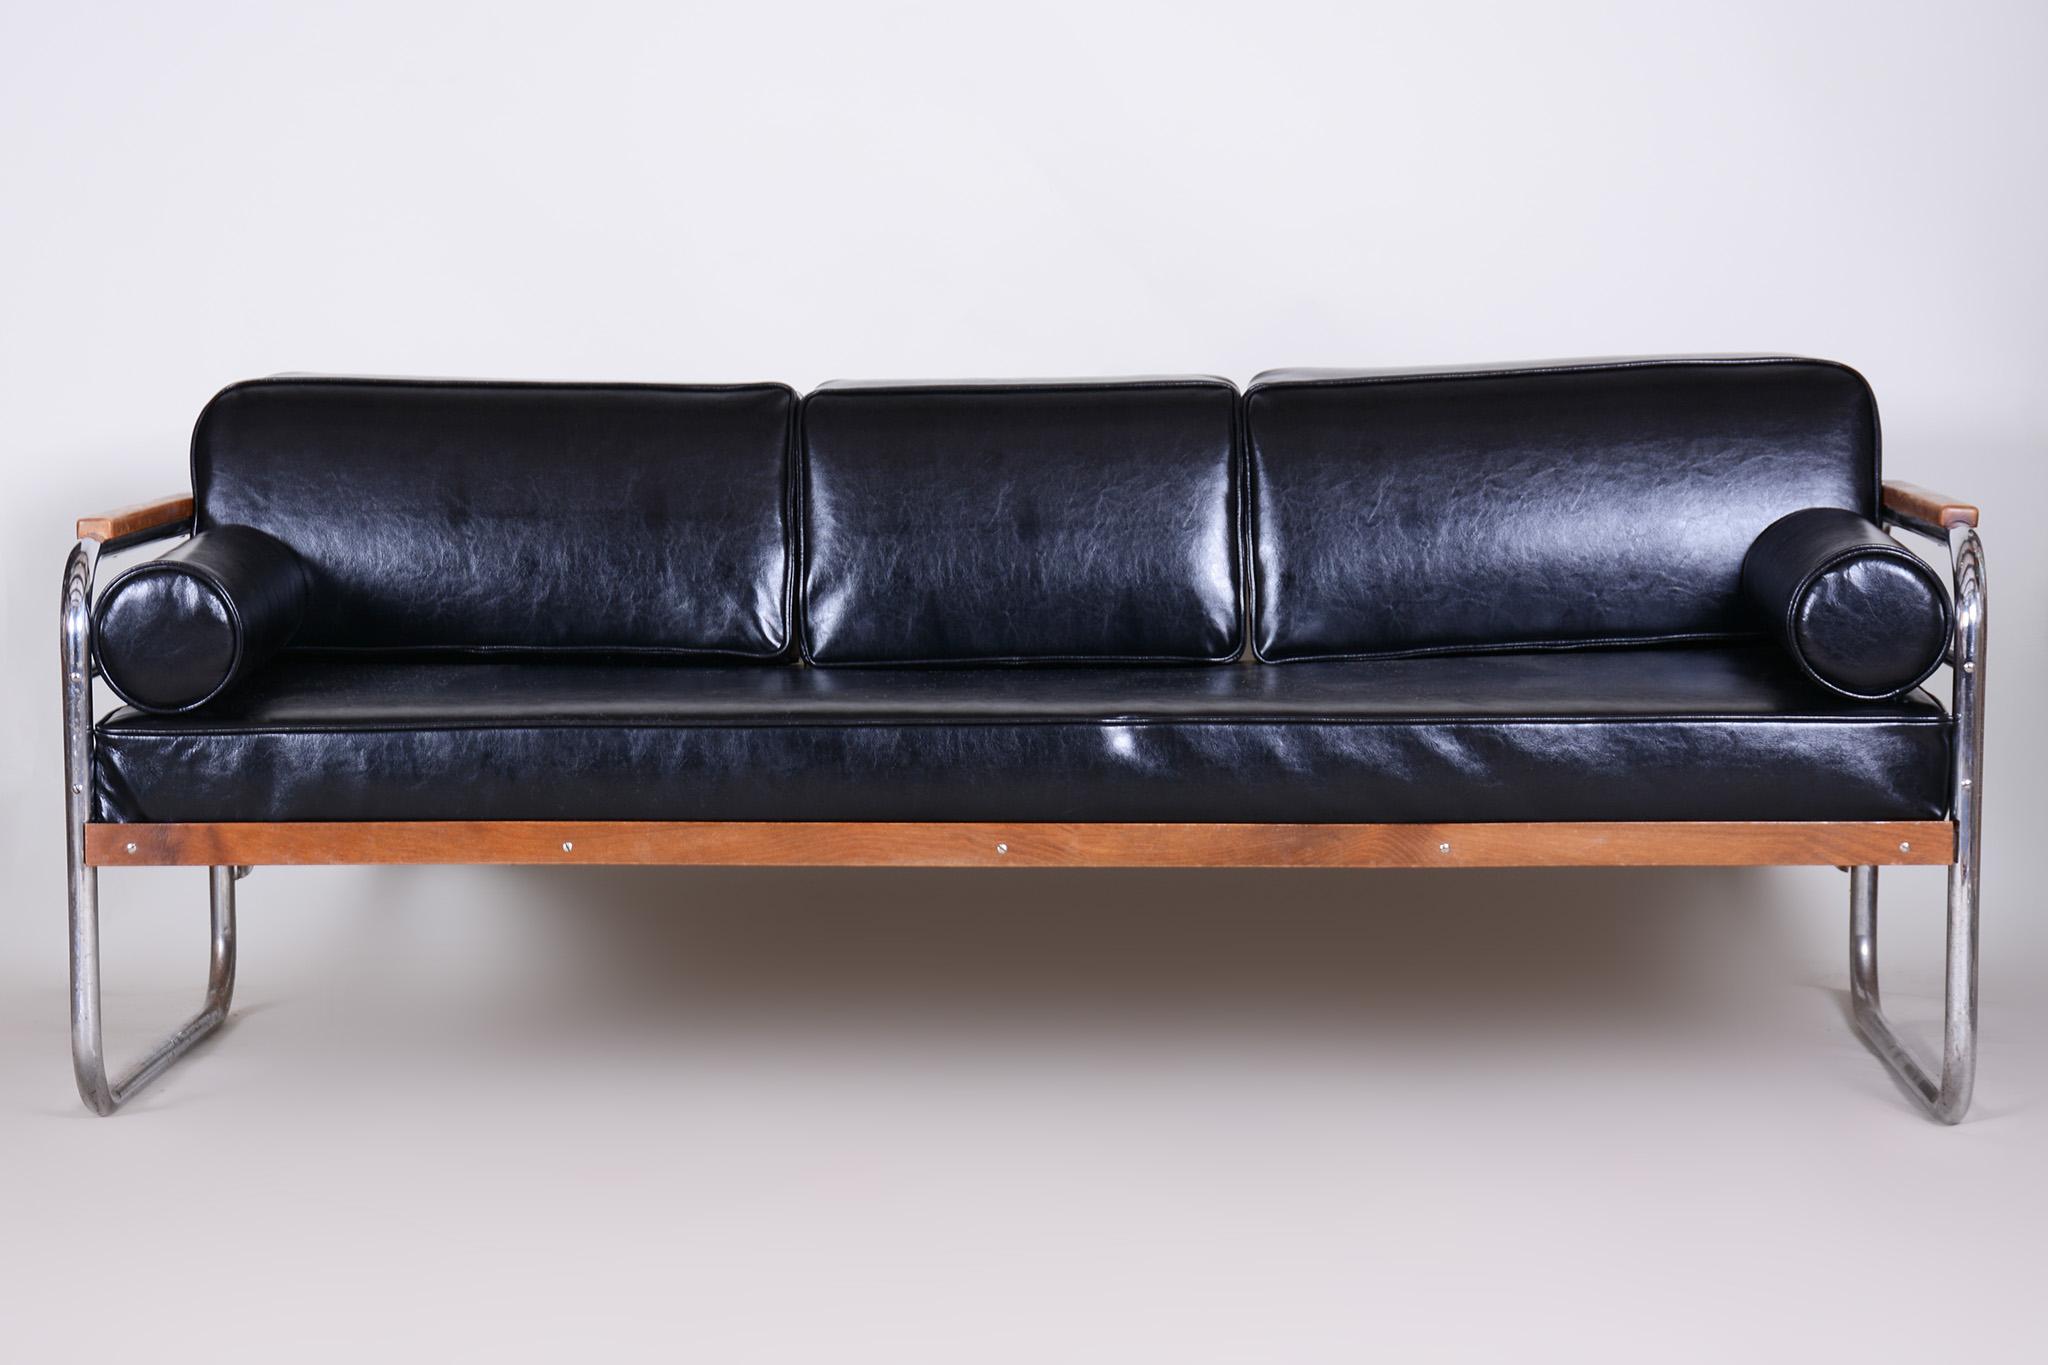 Mid-20th Century Black Leather Sofa Made by Thonet in 1930s Czechia For Sale